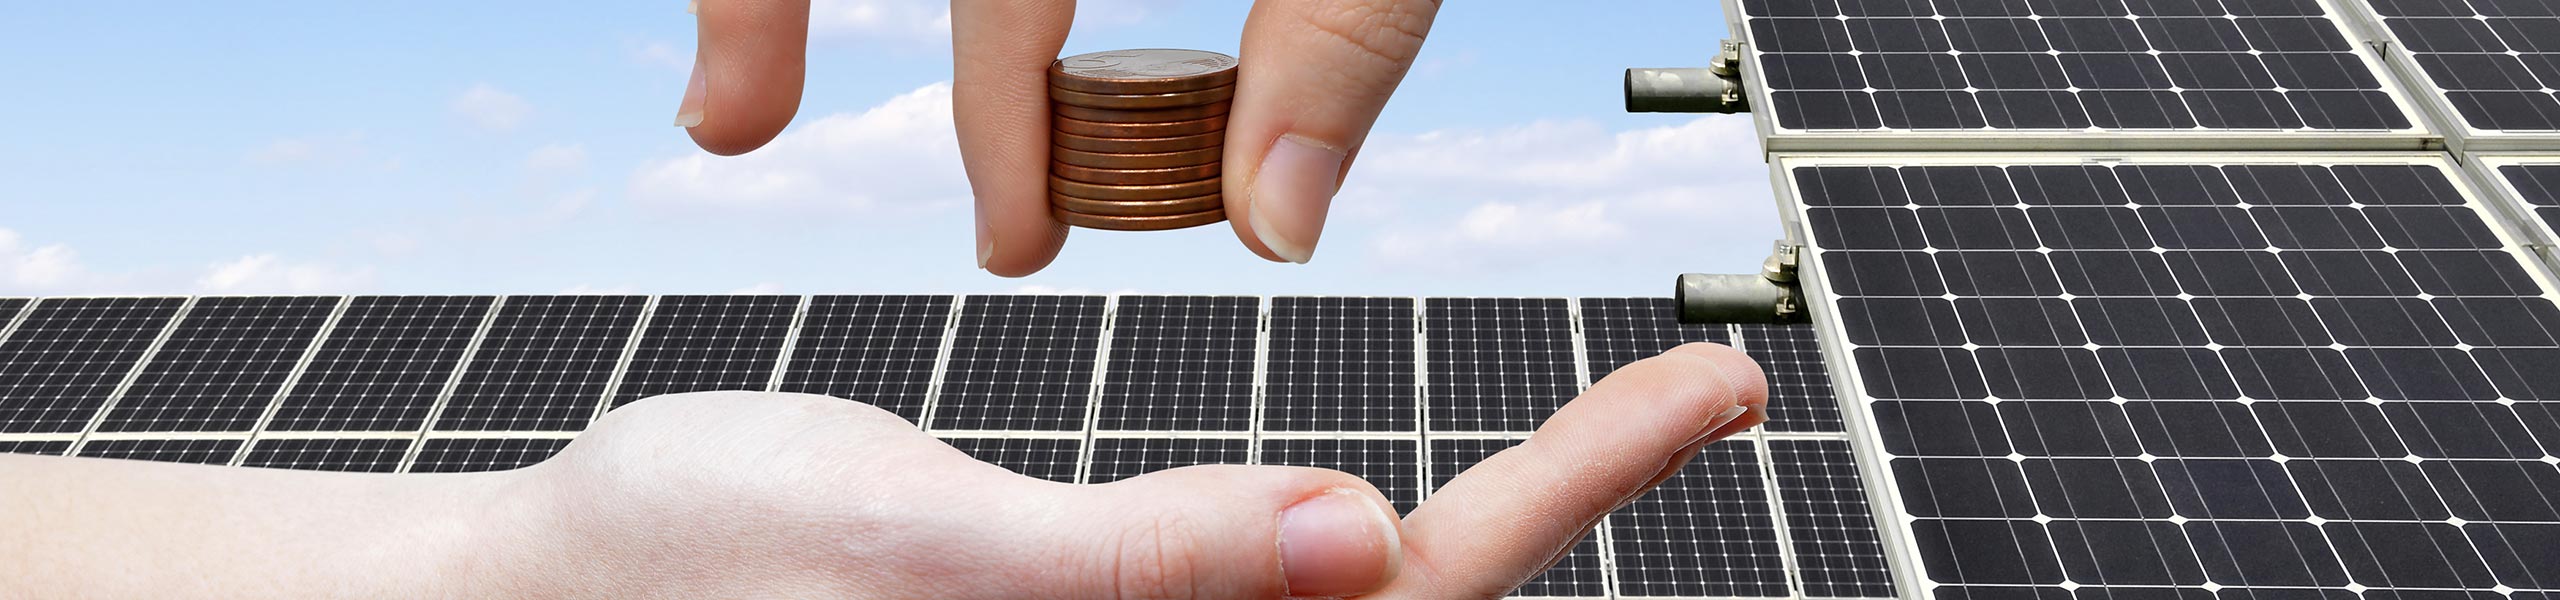 The Real Value of Investing in Solar Power